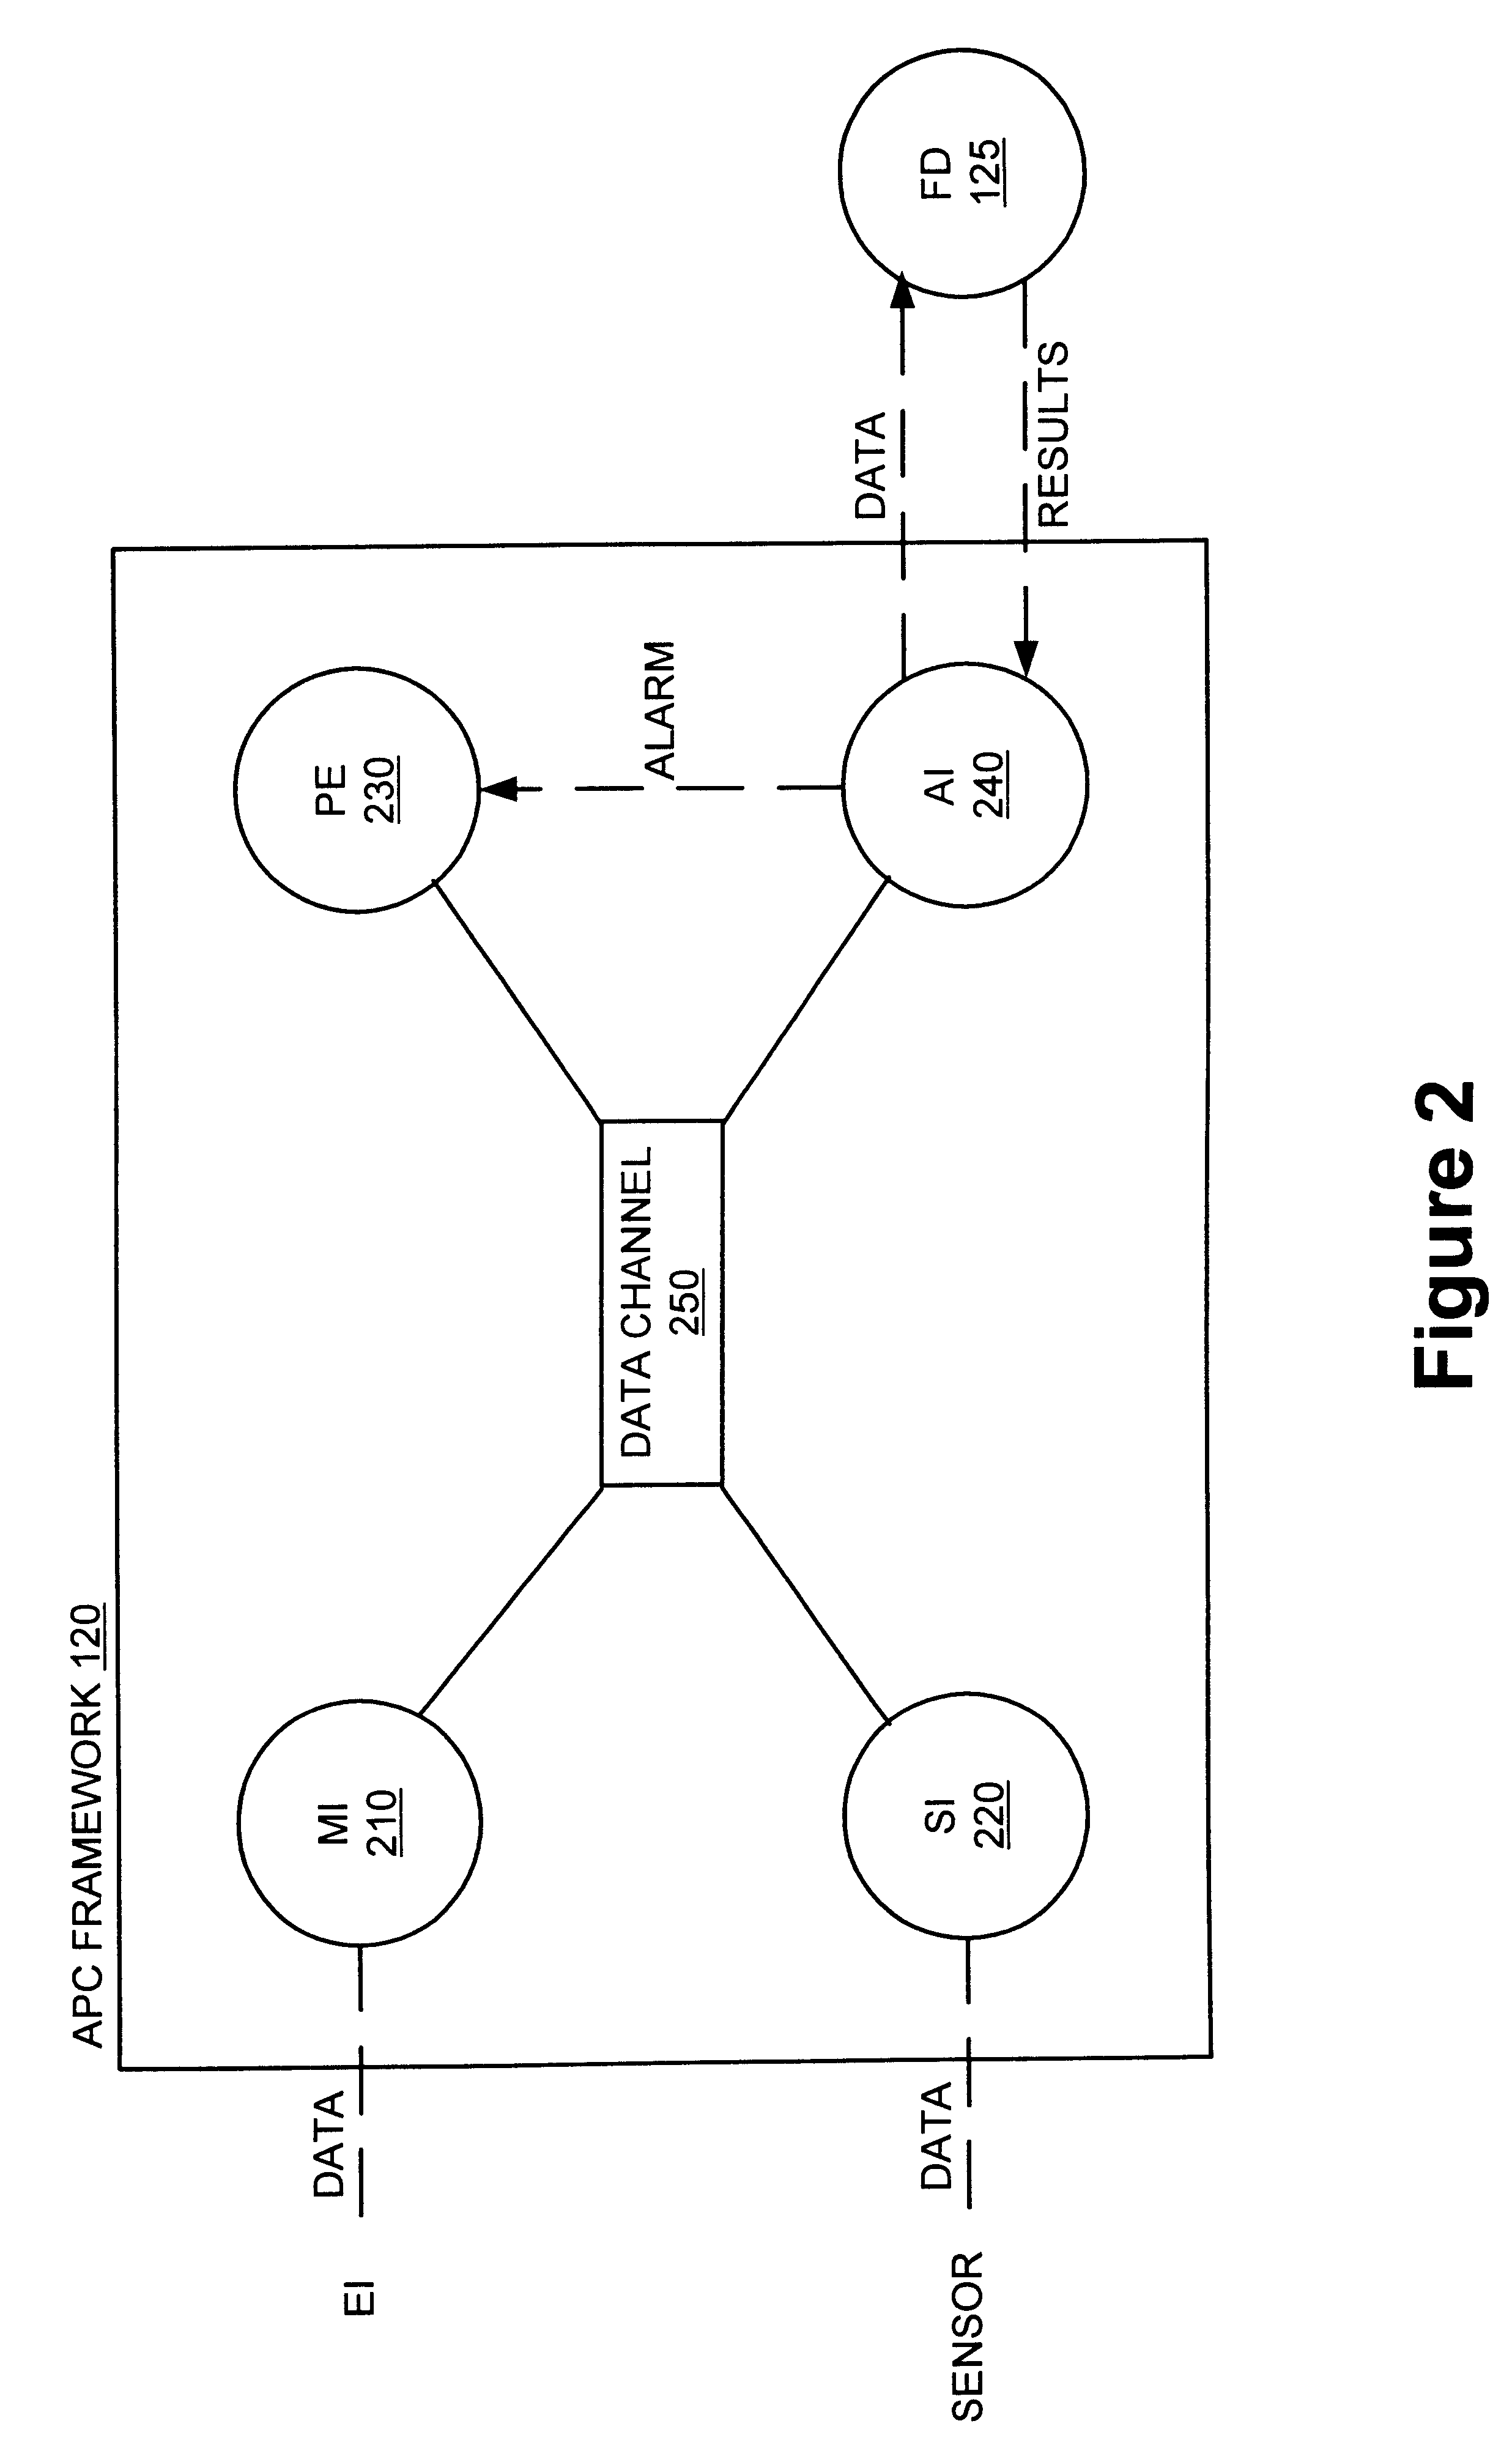 Method and apparatus for fault detection of a processing tool in an advanced process control (APC) framework